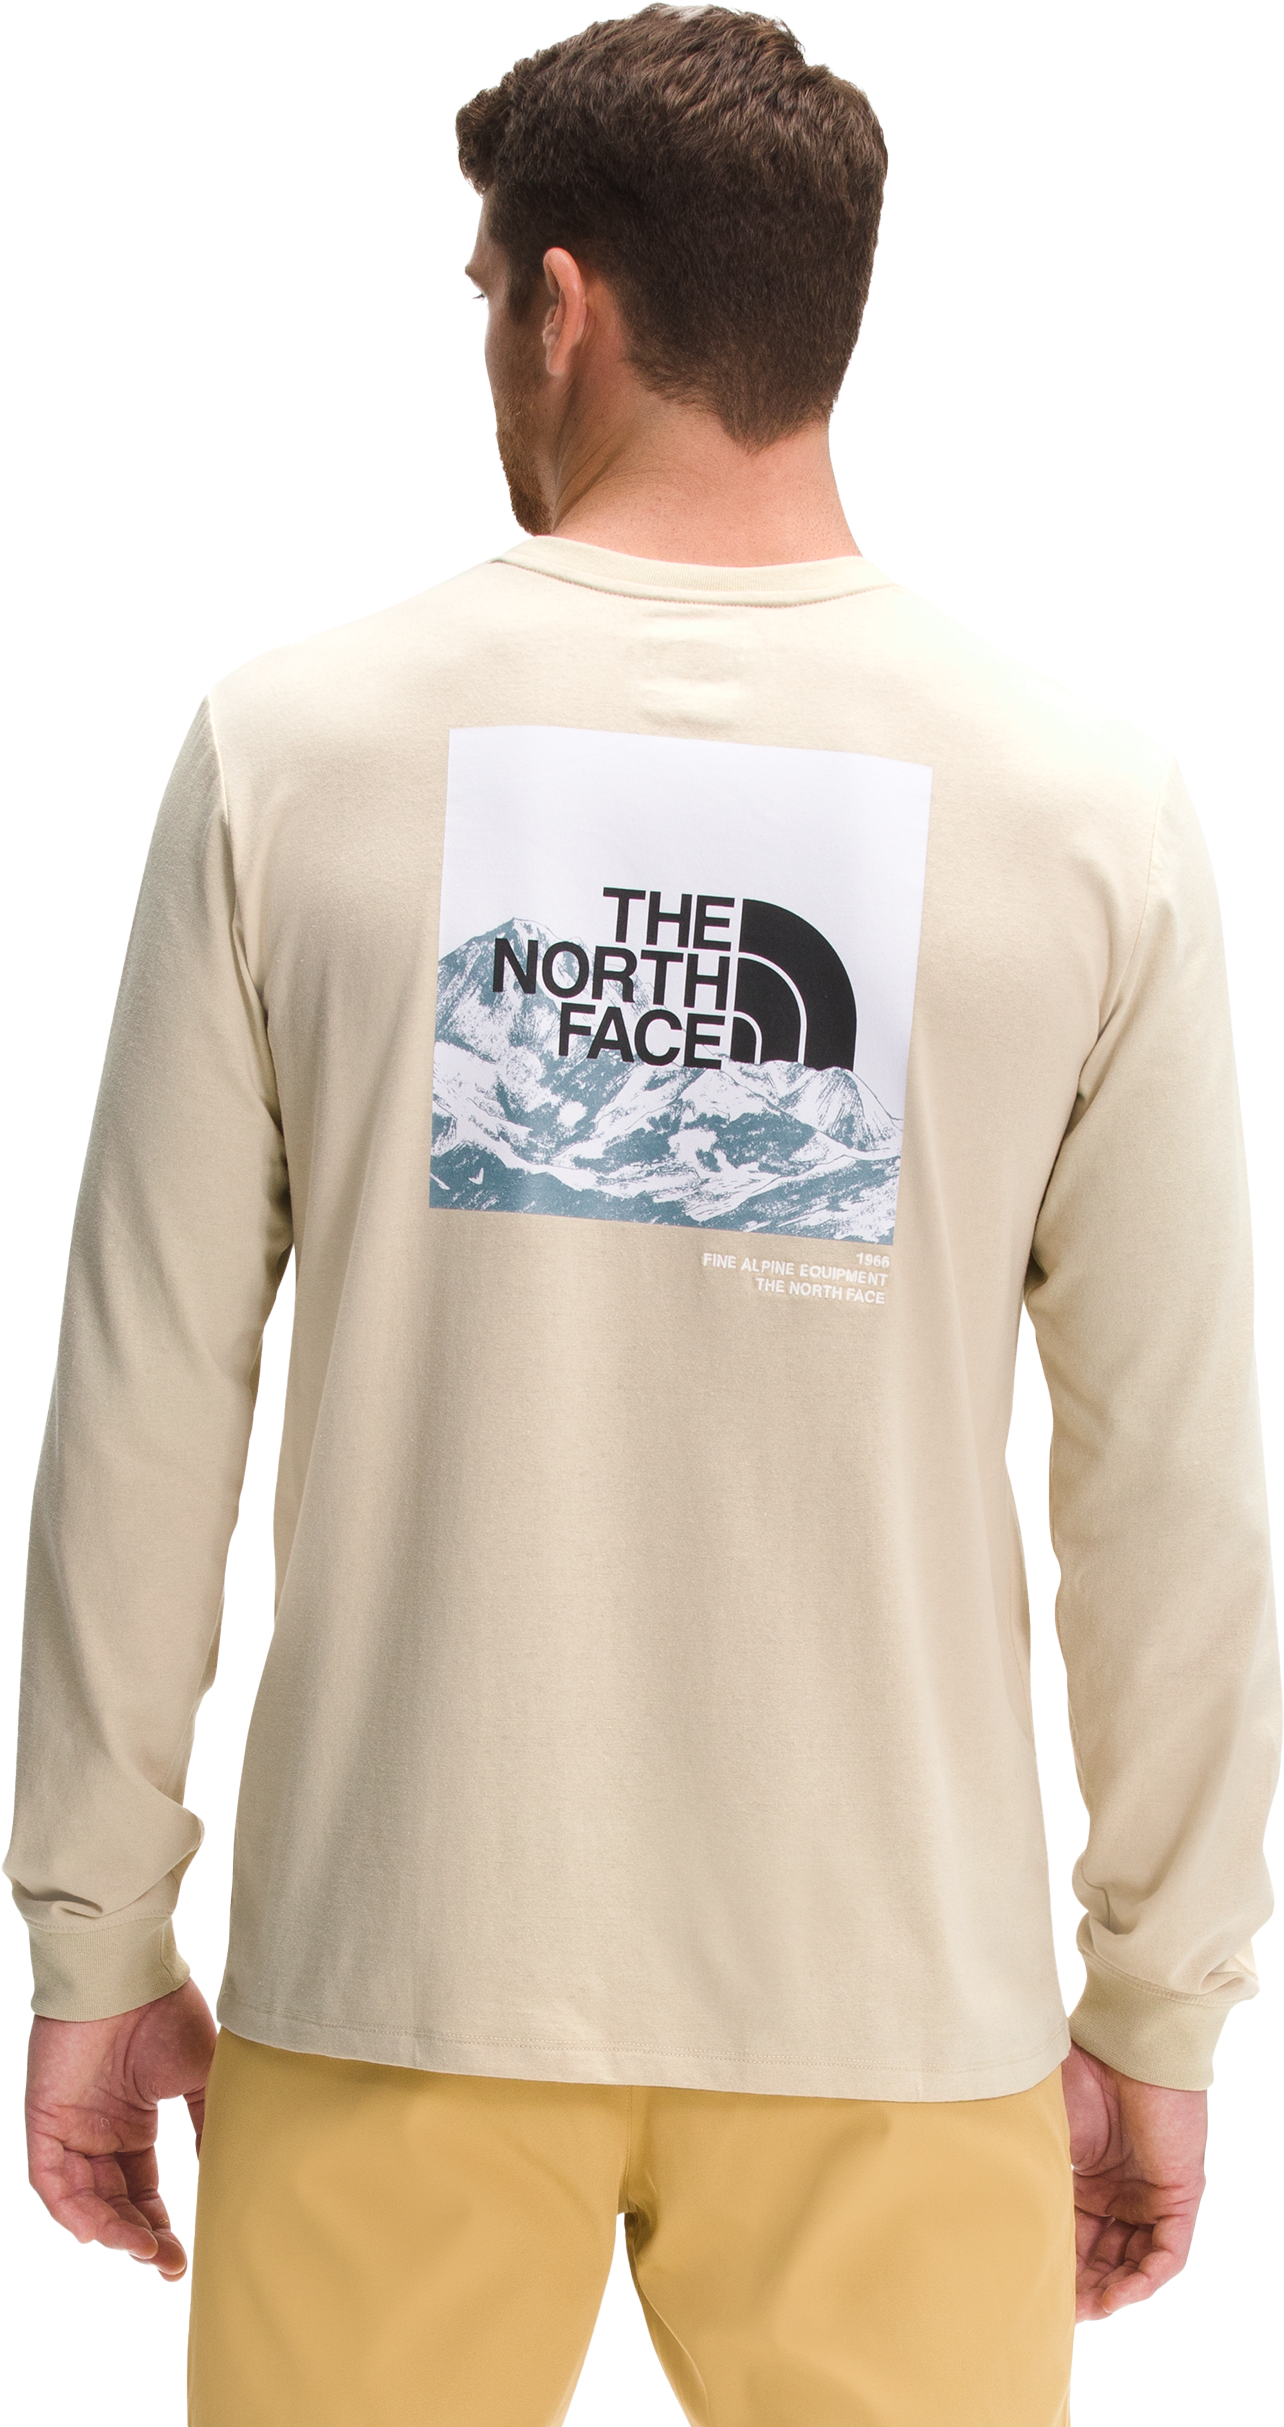 The North Face Logo Play Long-Sleeve T-Shirt for Men - Gravel - S